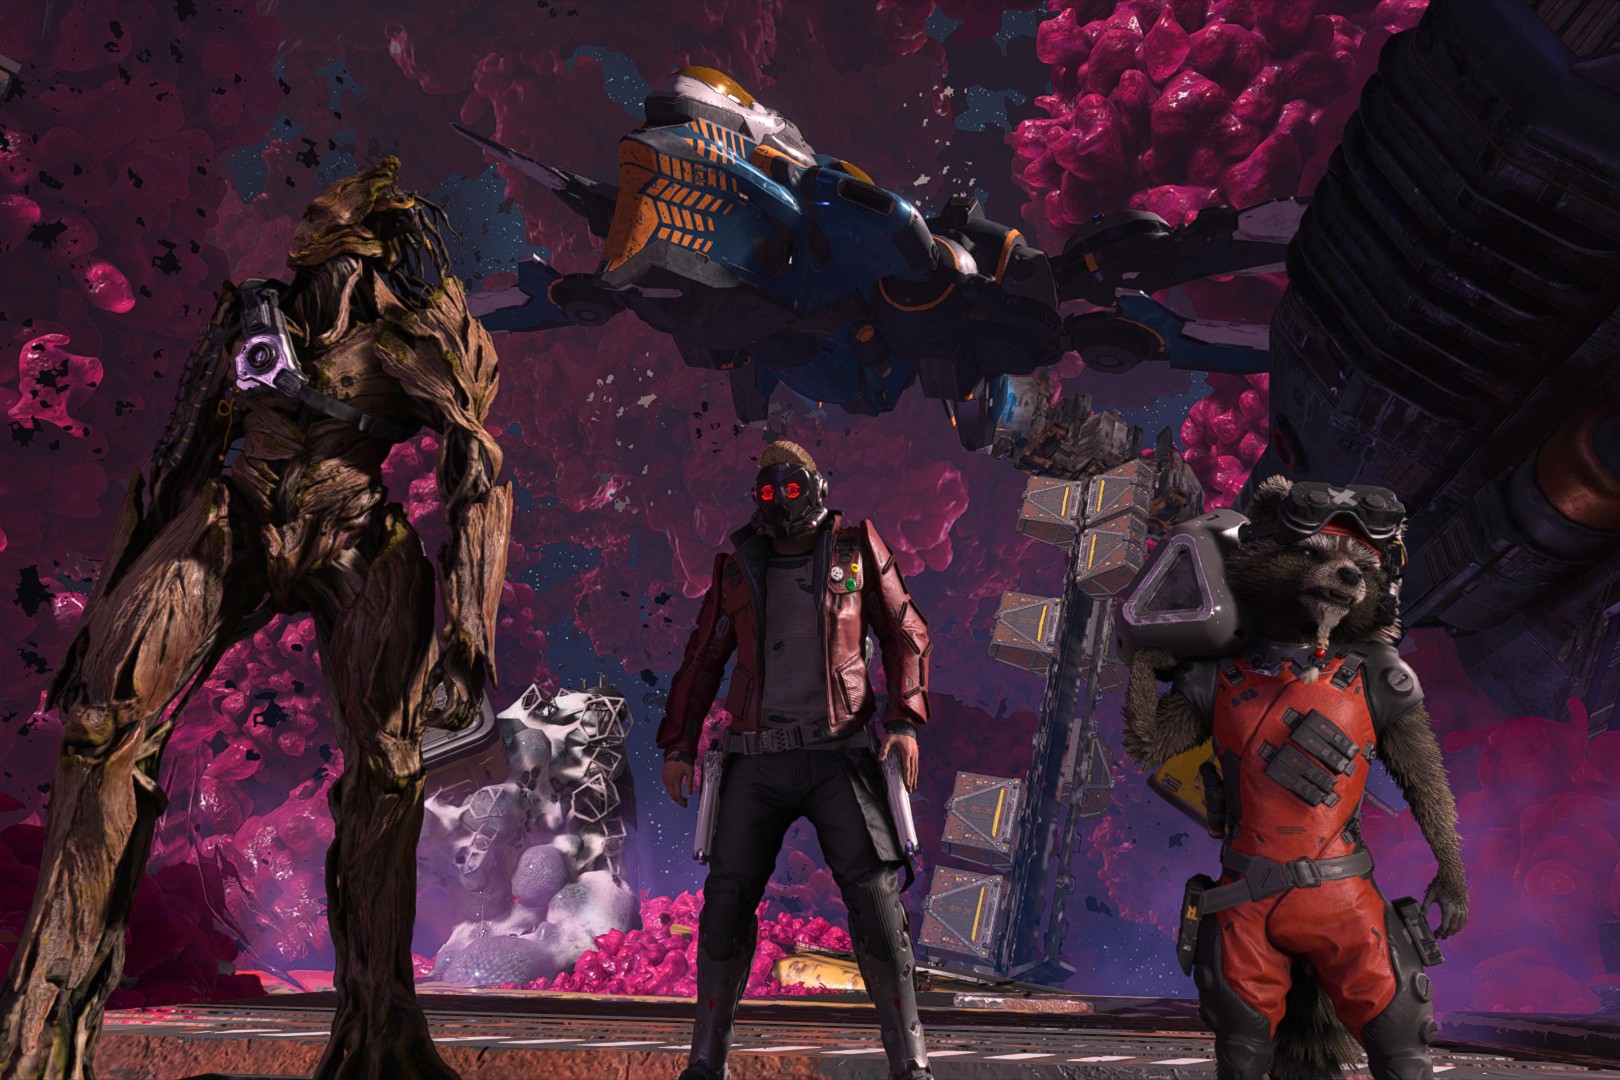 Marvel's Guardians Of The Galaxy Update Adds Raytracing On PS5 And Improved  Performance On PS4 - PlayStation Universe